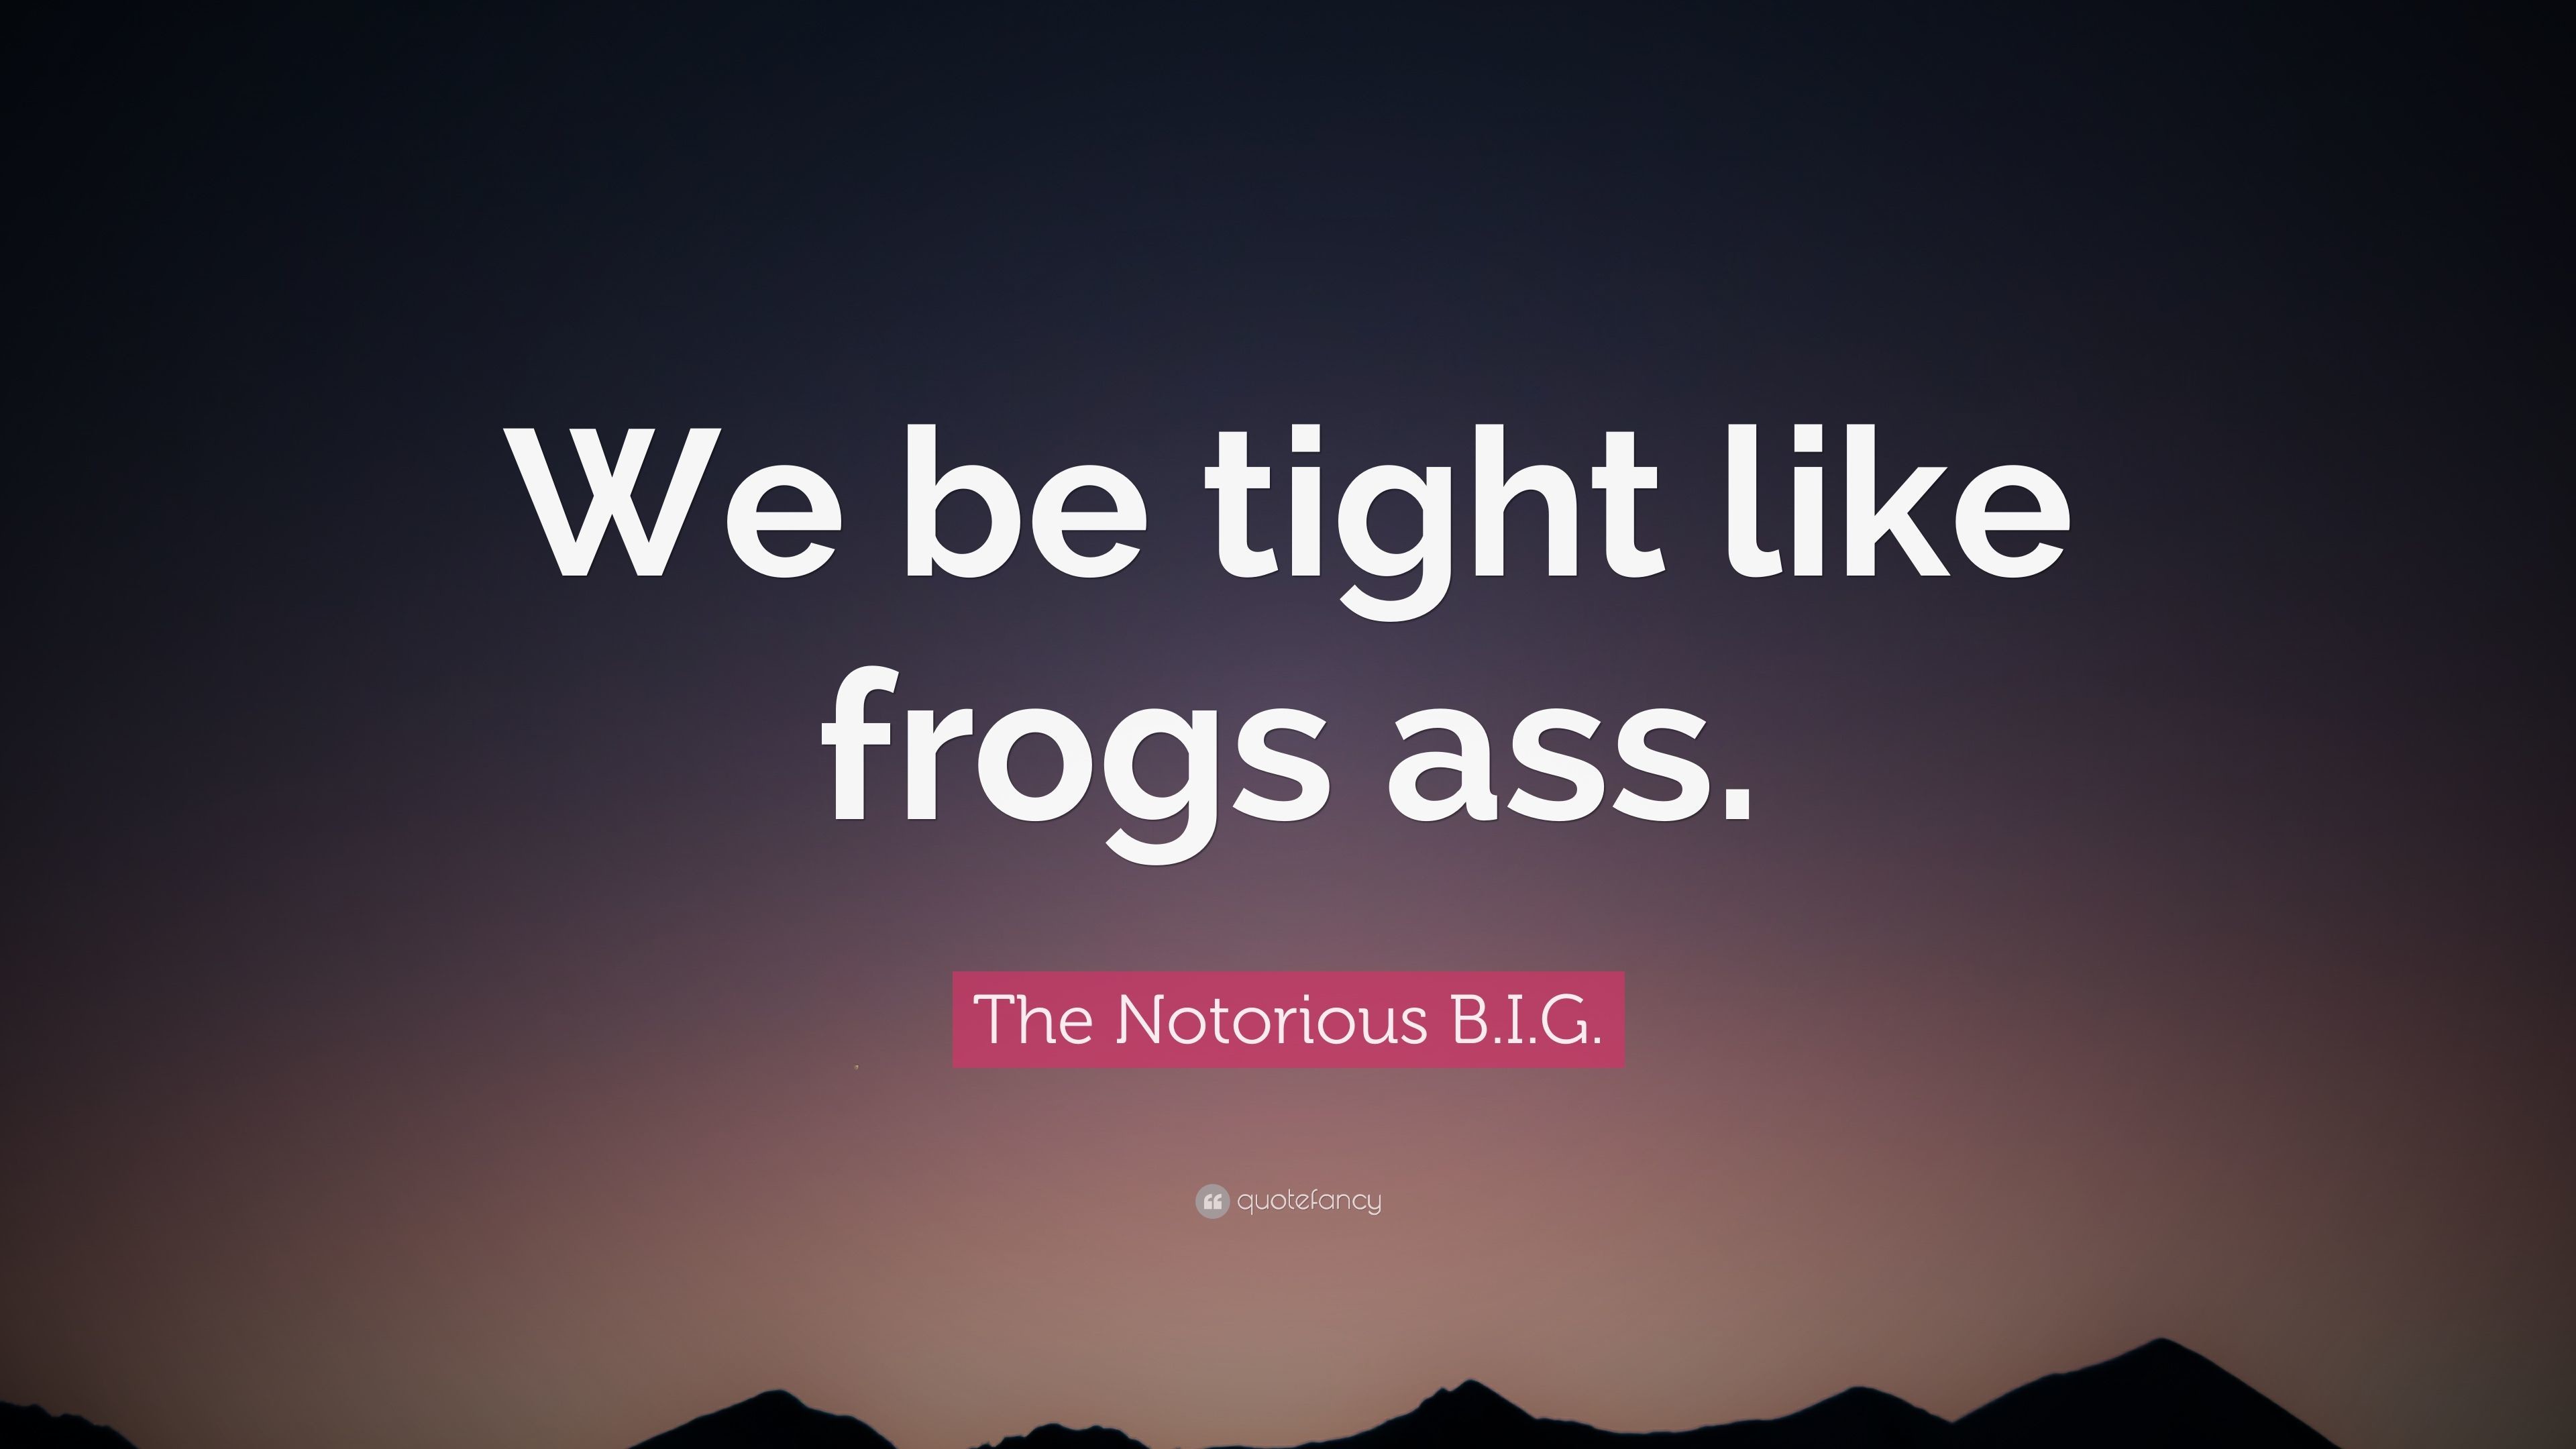 3840x2160 The Notorious B.I.G. Quote: “We be tight like frogs ass.”